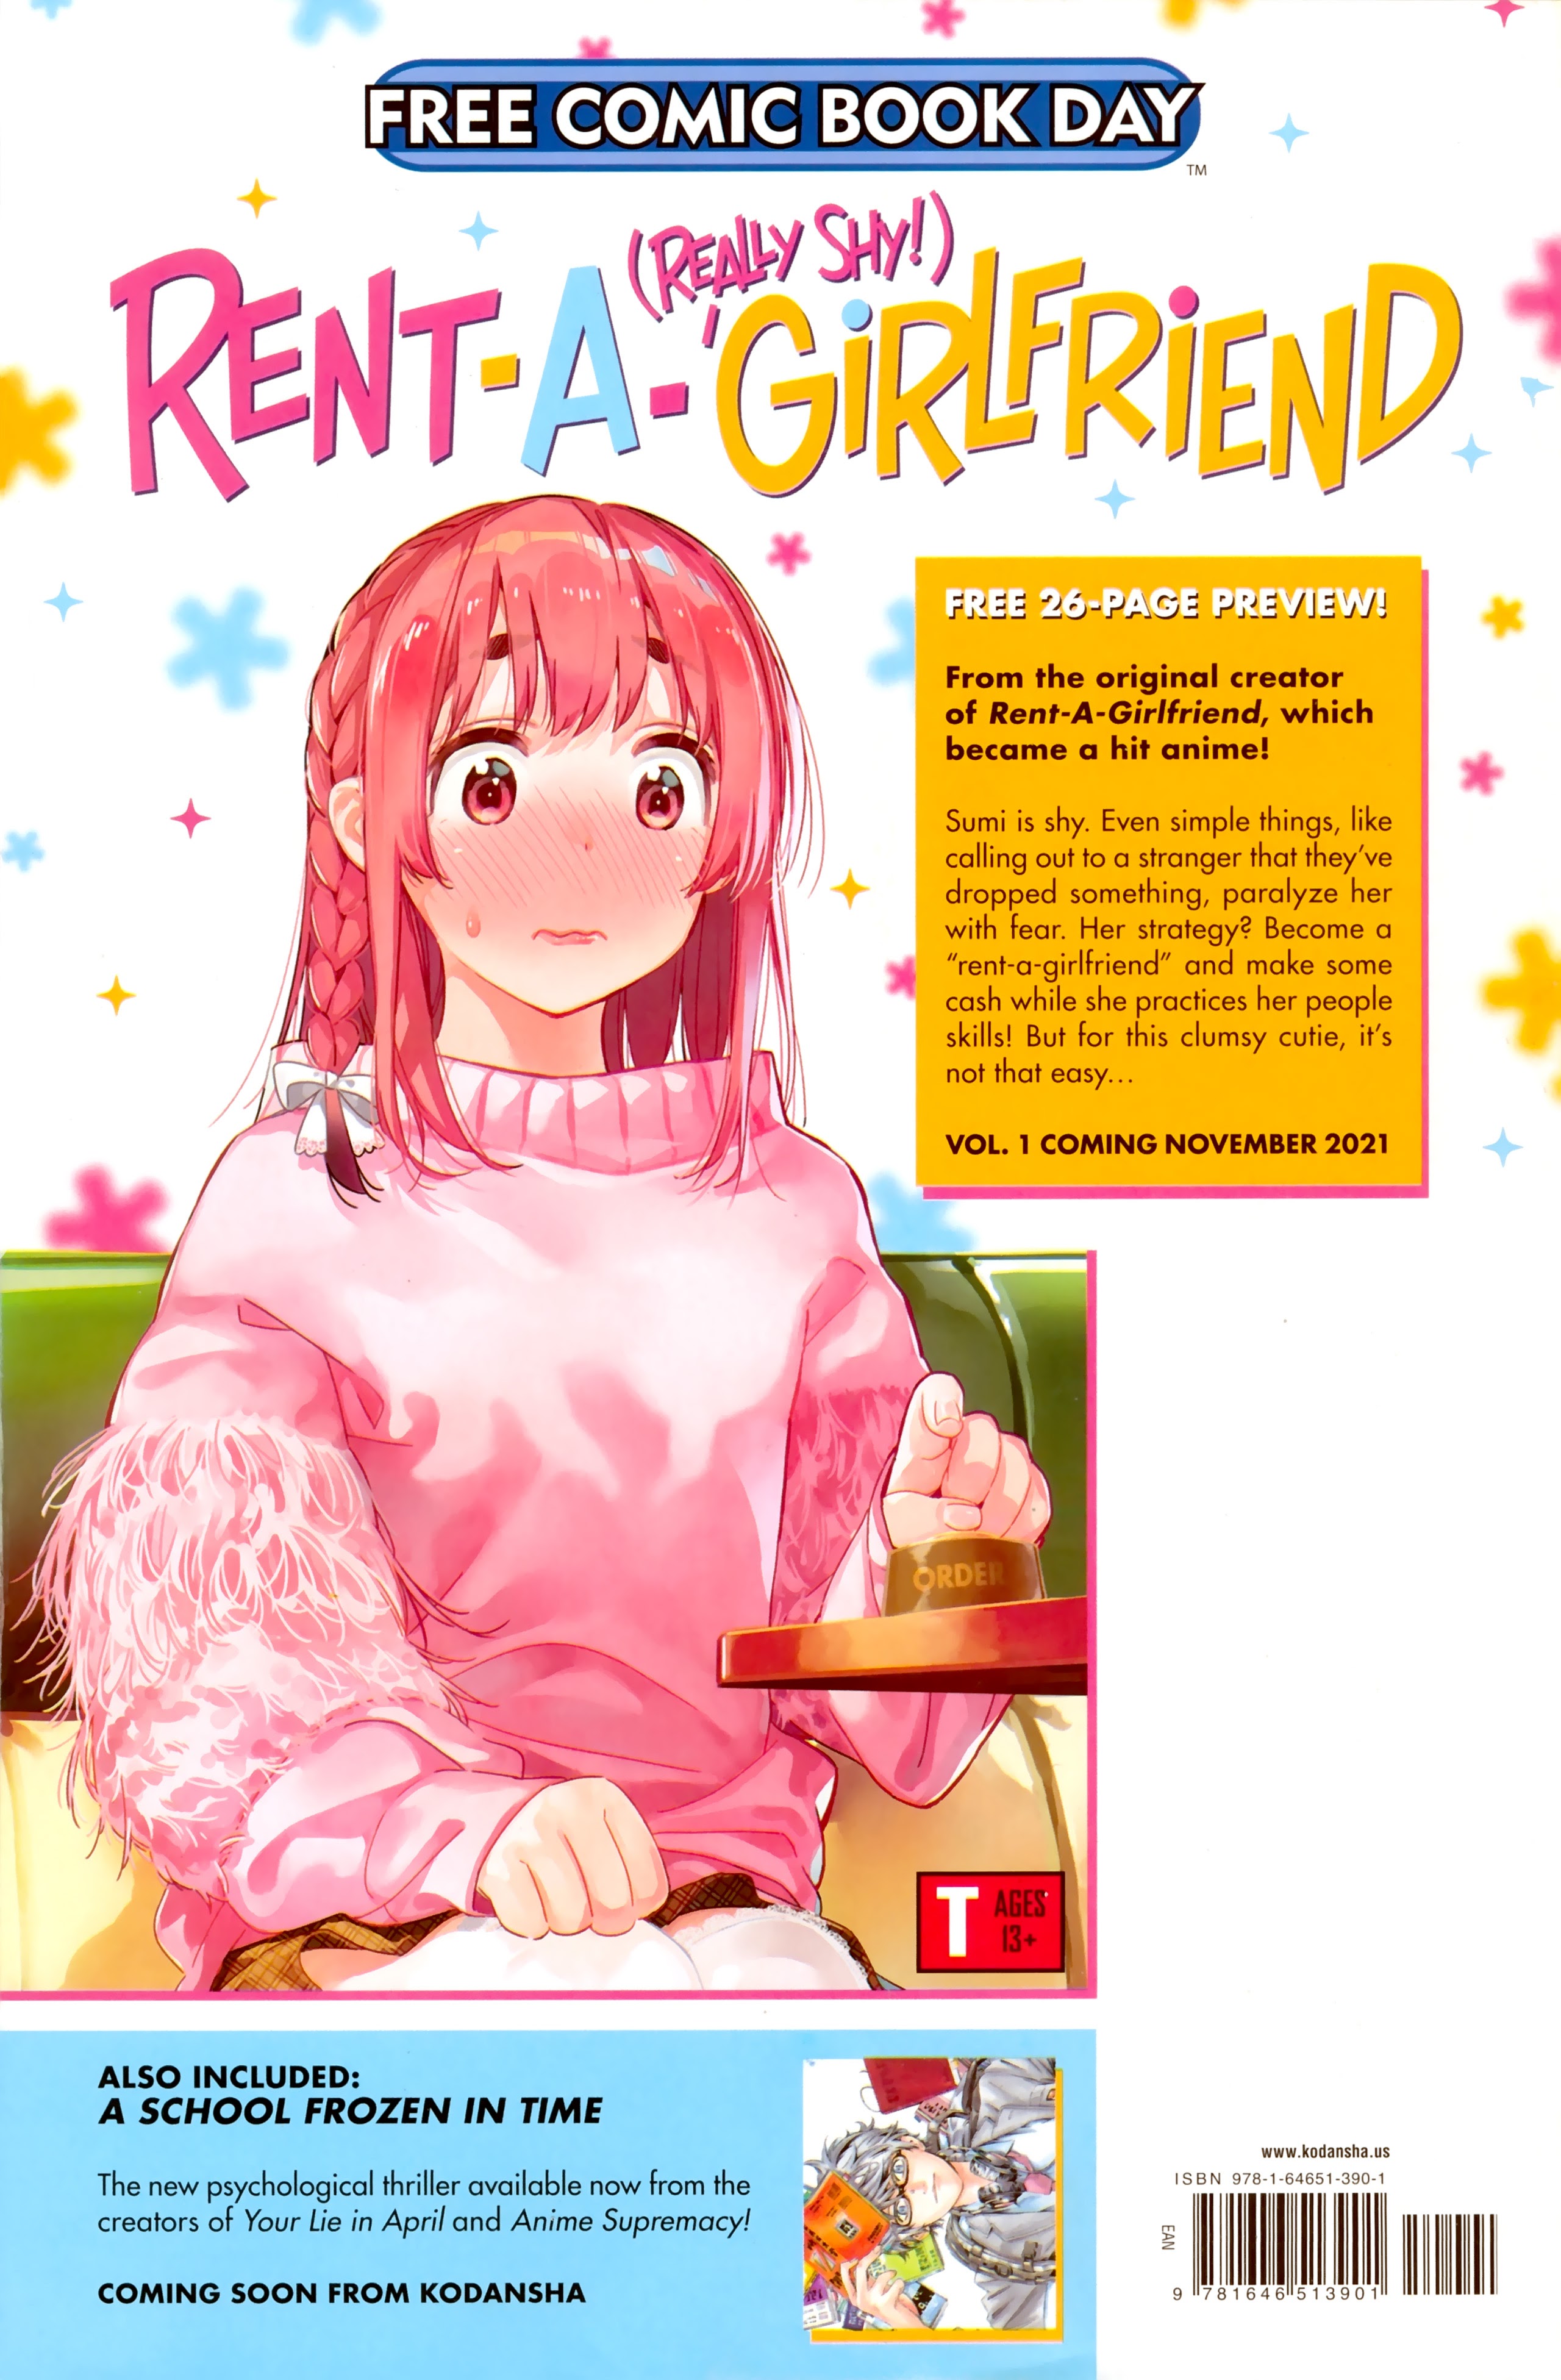 Read online Free Comic Book Day 2021 comic -  Issue # Rent-A-Girlfriend - 1